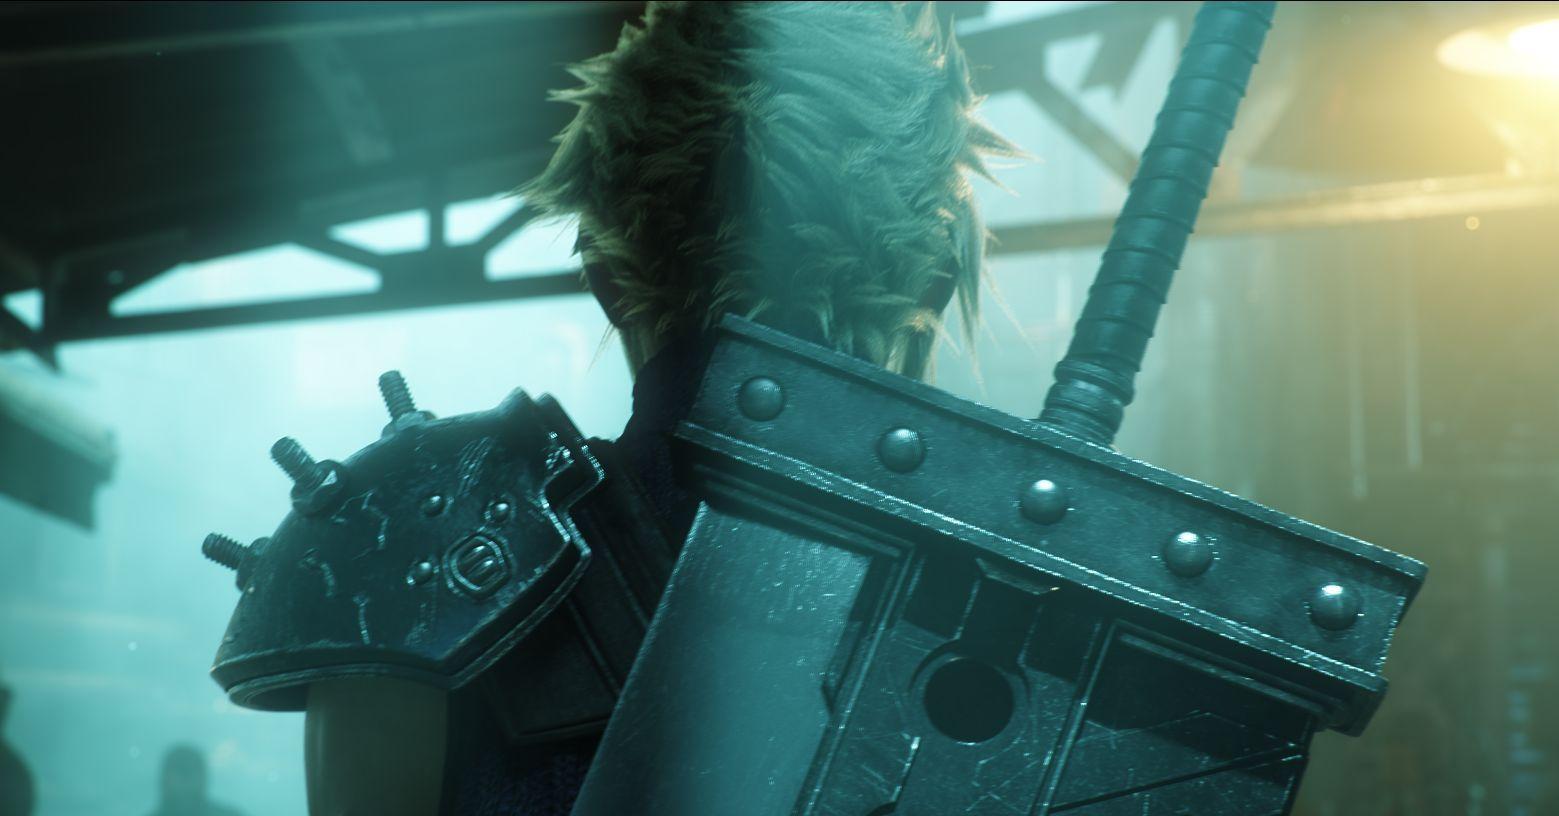 Final Fantasy VII Remake Gets Info on Battle, Party Size, Character